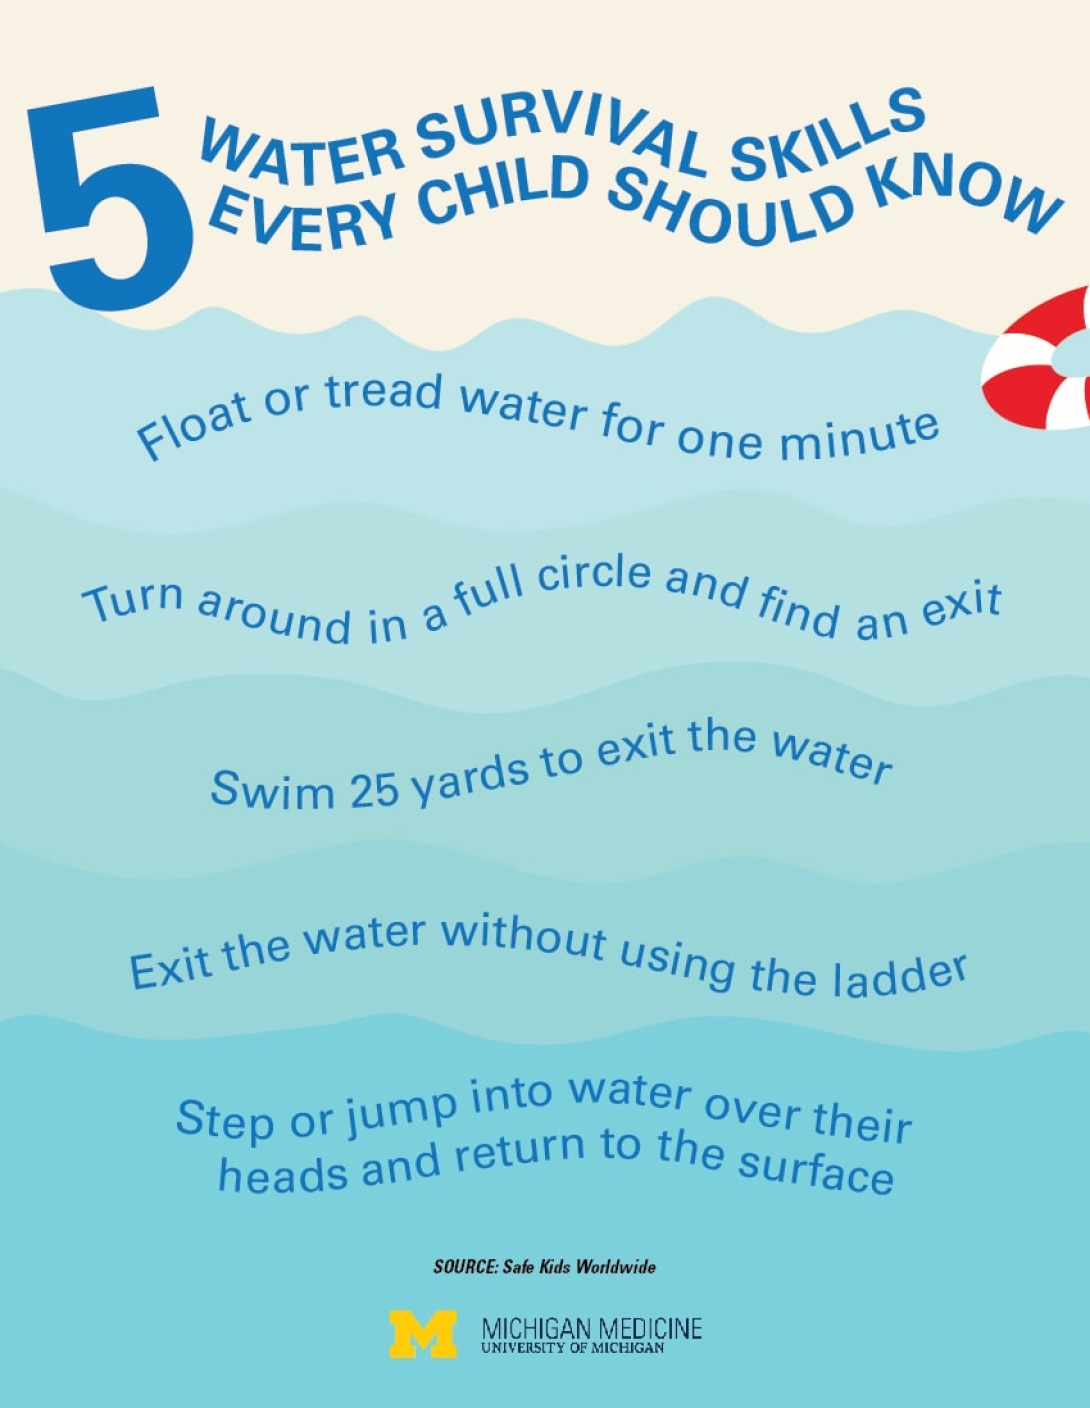 Water Safety: Tips for Children Around Ponds and Pools